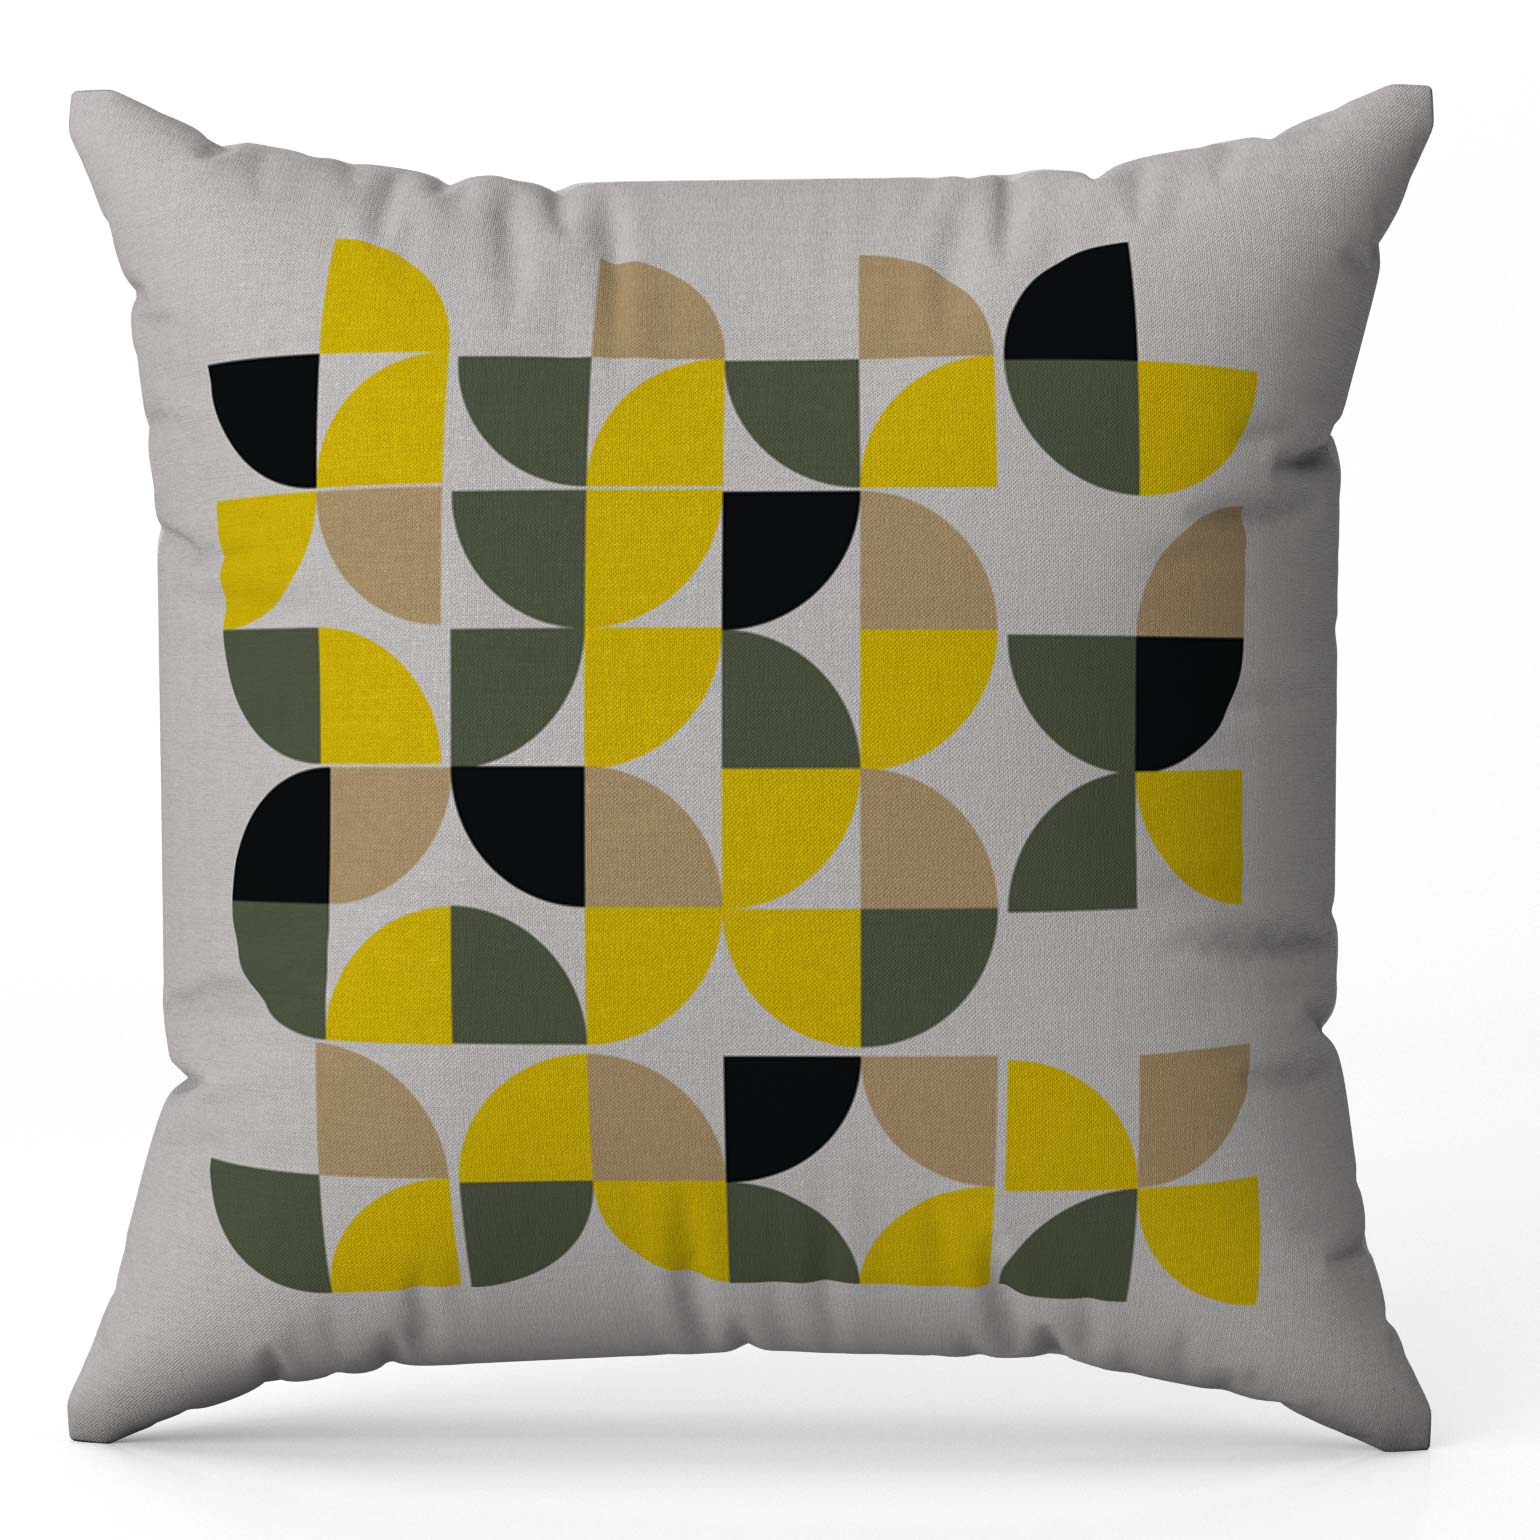 Munick Vogue Cushion Cover Trendy Home